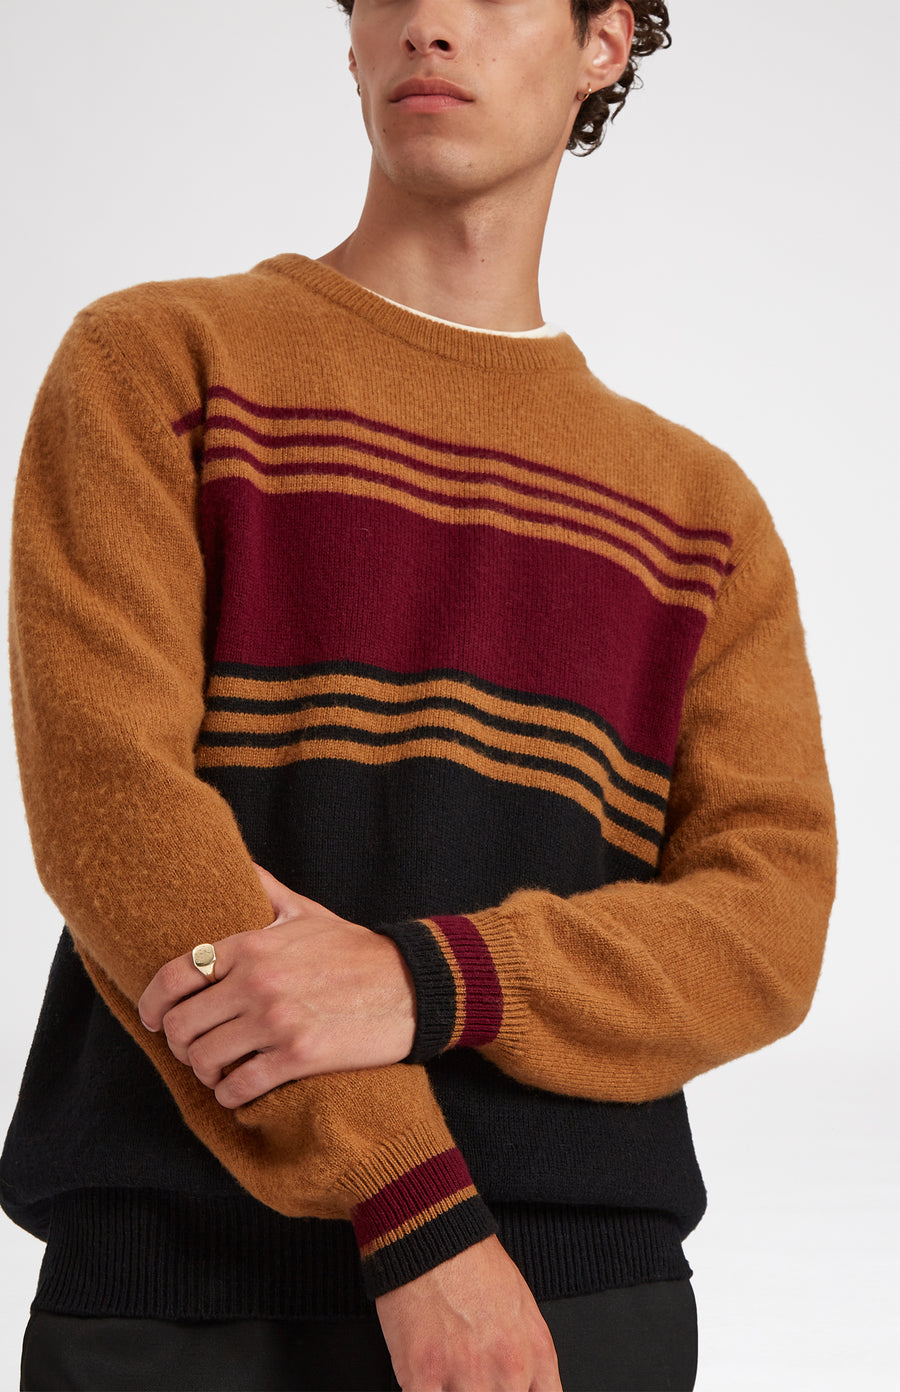 Round Neck Brushed Lambswool Jumper in Vicuna Stripe showing stripe detail- Pringle of Scotland